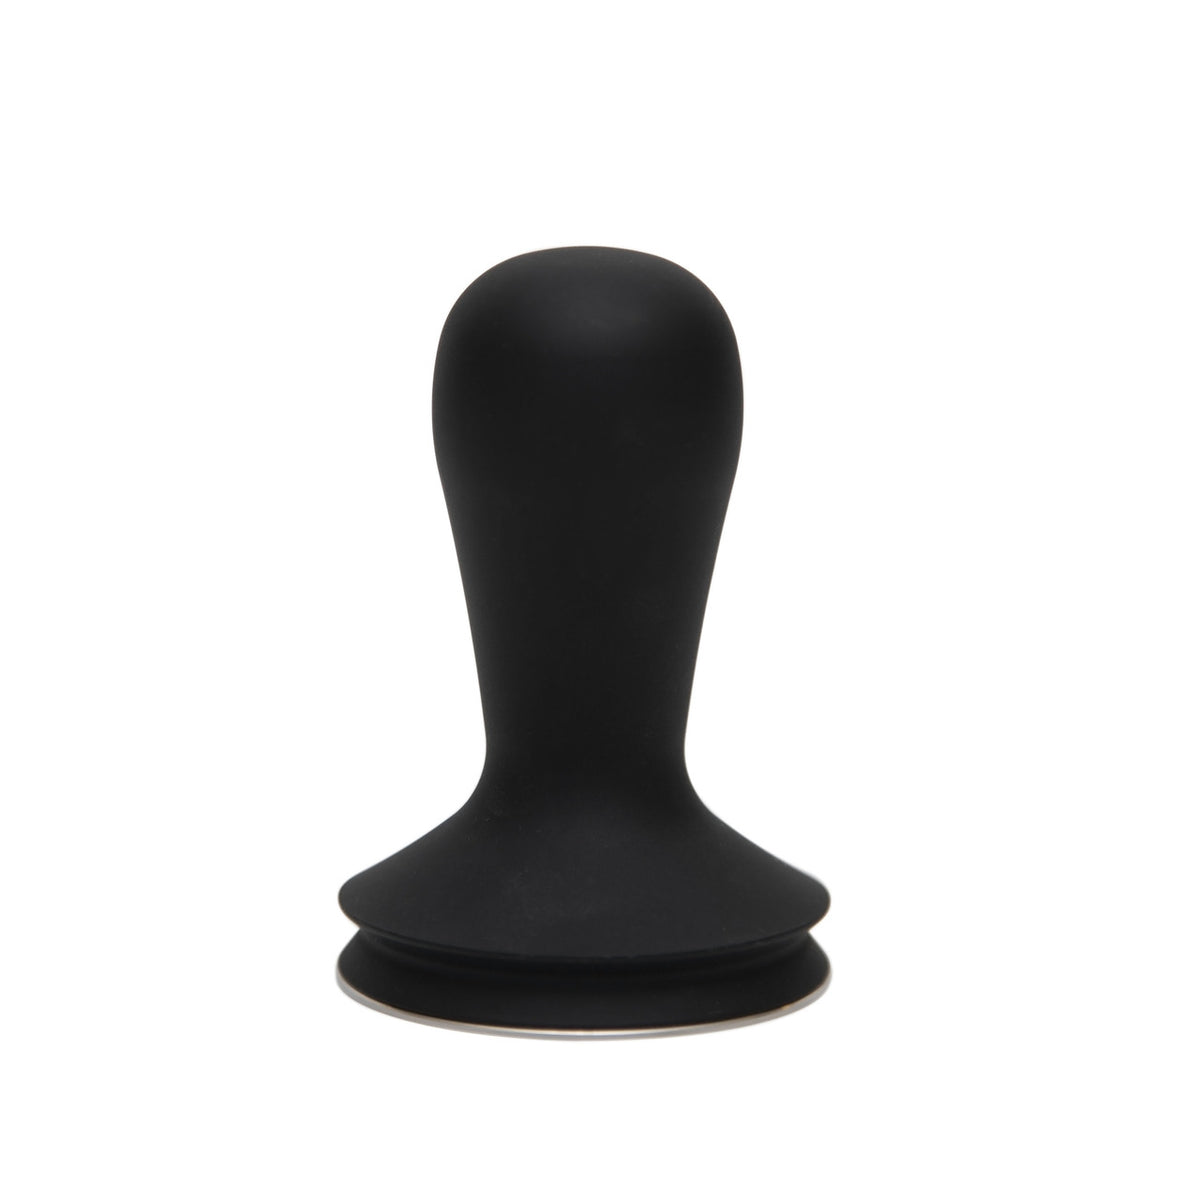 Tamper With Case - 58.4mm